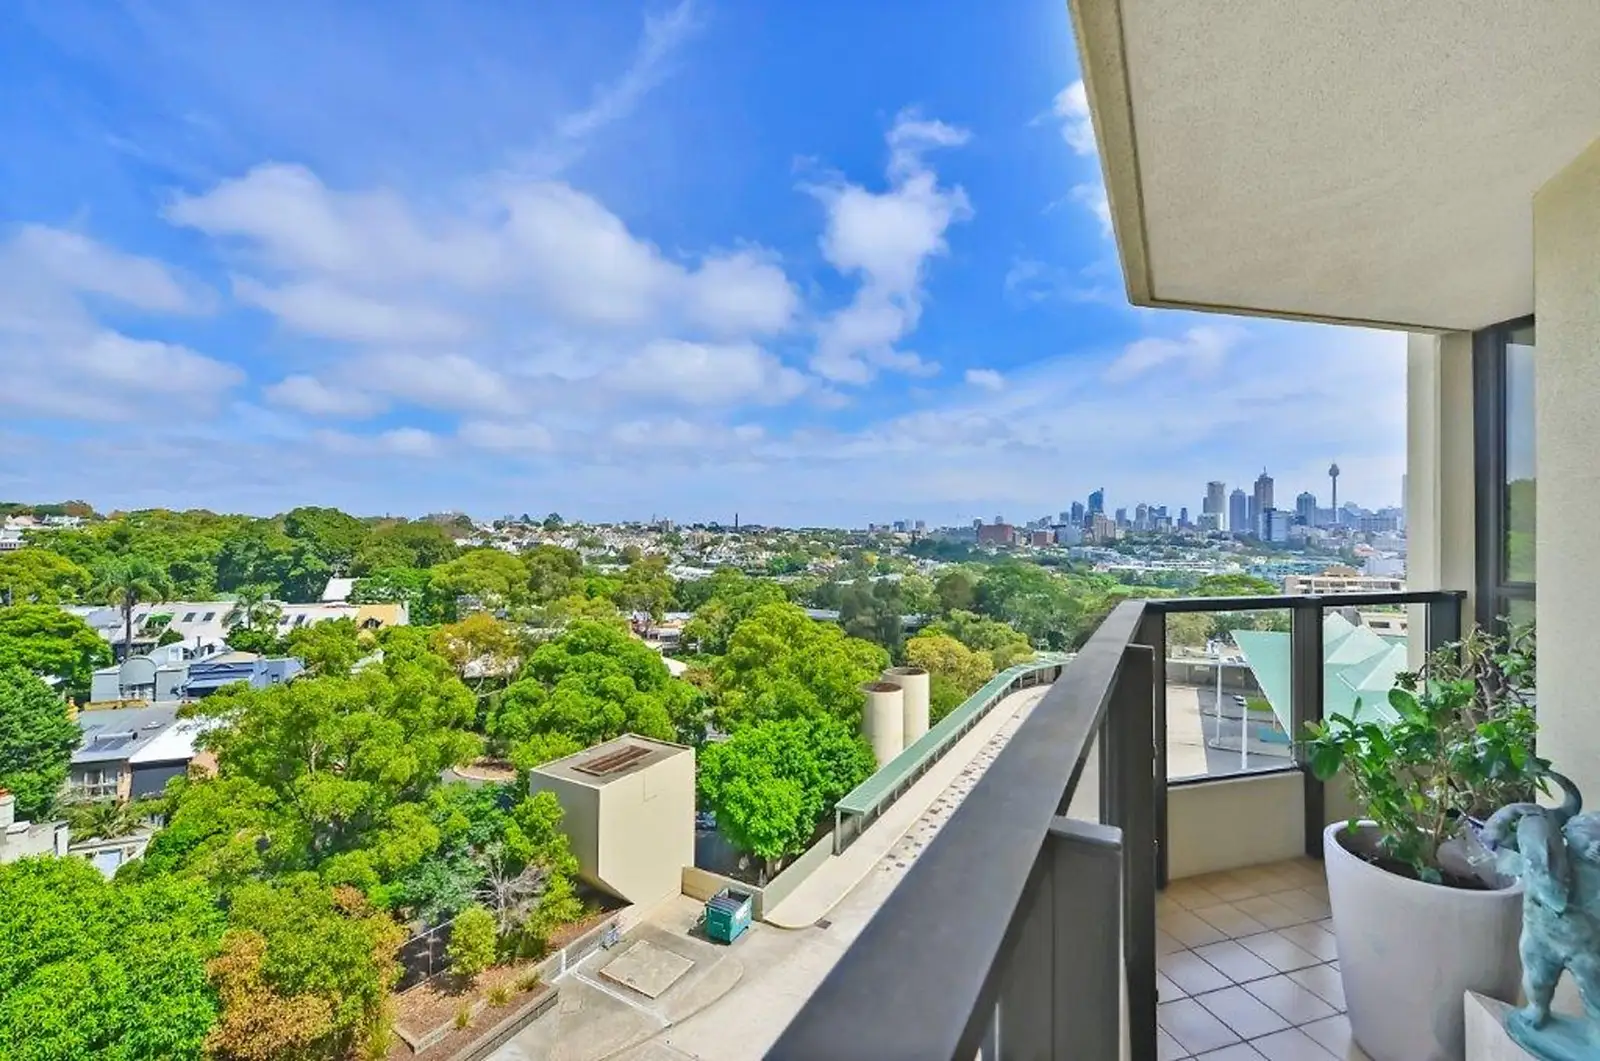 Photo #1: 1011/180 Ocean Street, Edgecliff - Sold by Sydney Sotheby's International Realty